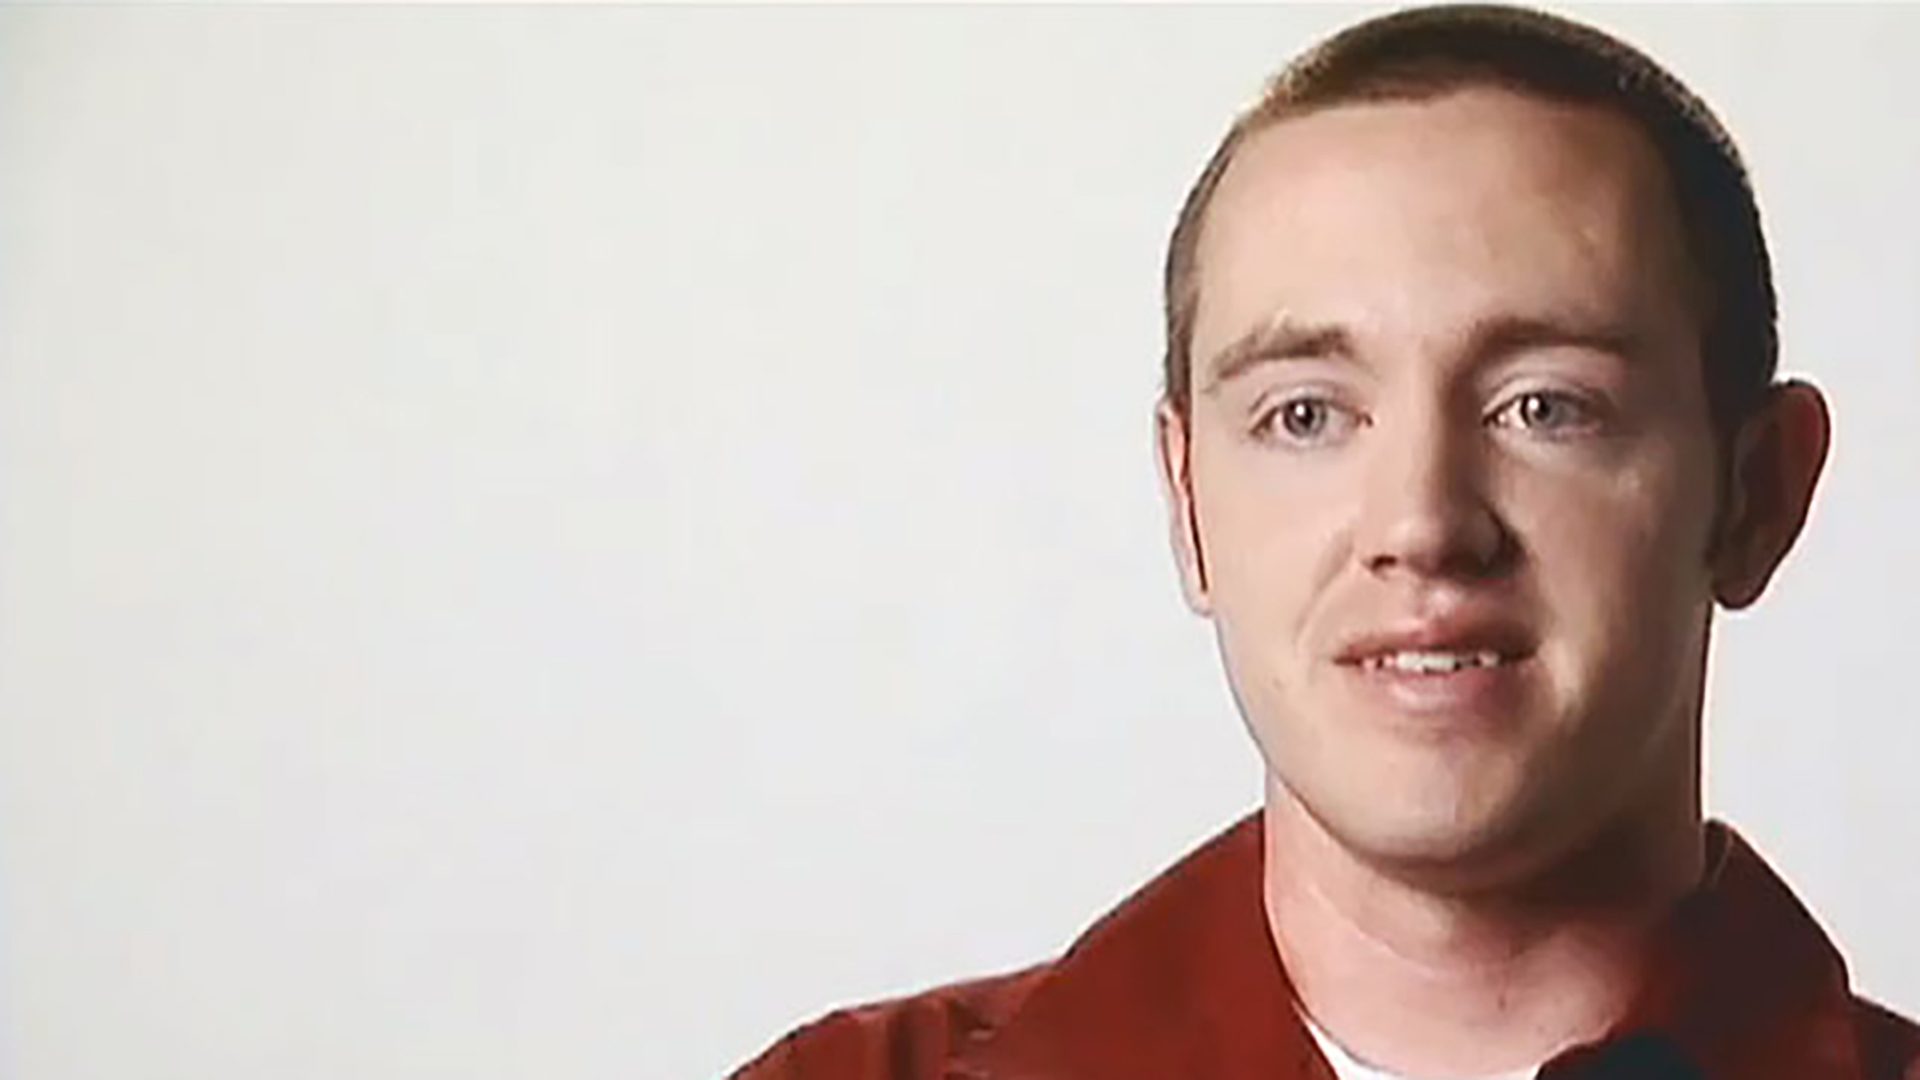 A young man with short hair wearing a red collared shirt is interviewed against a white background